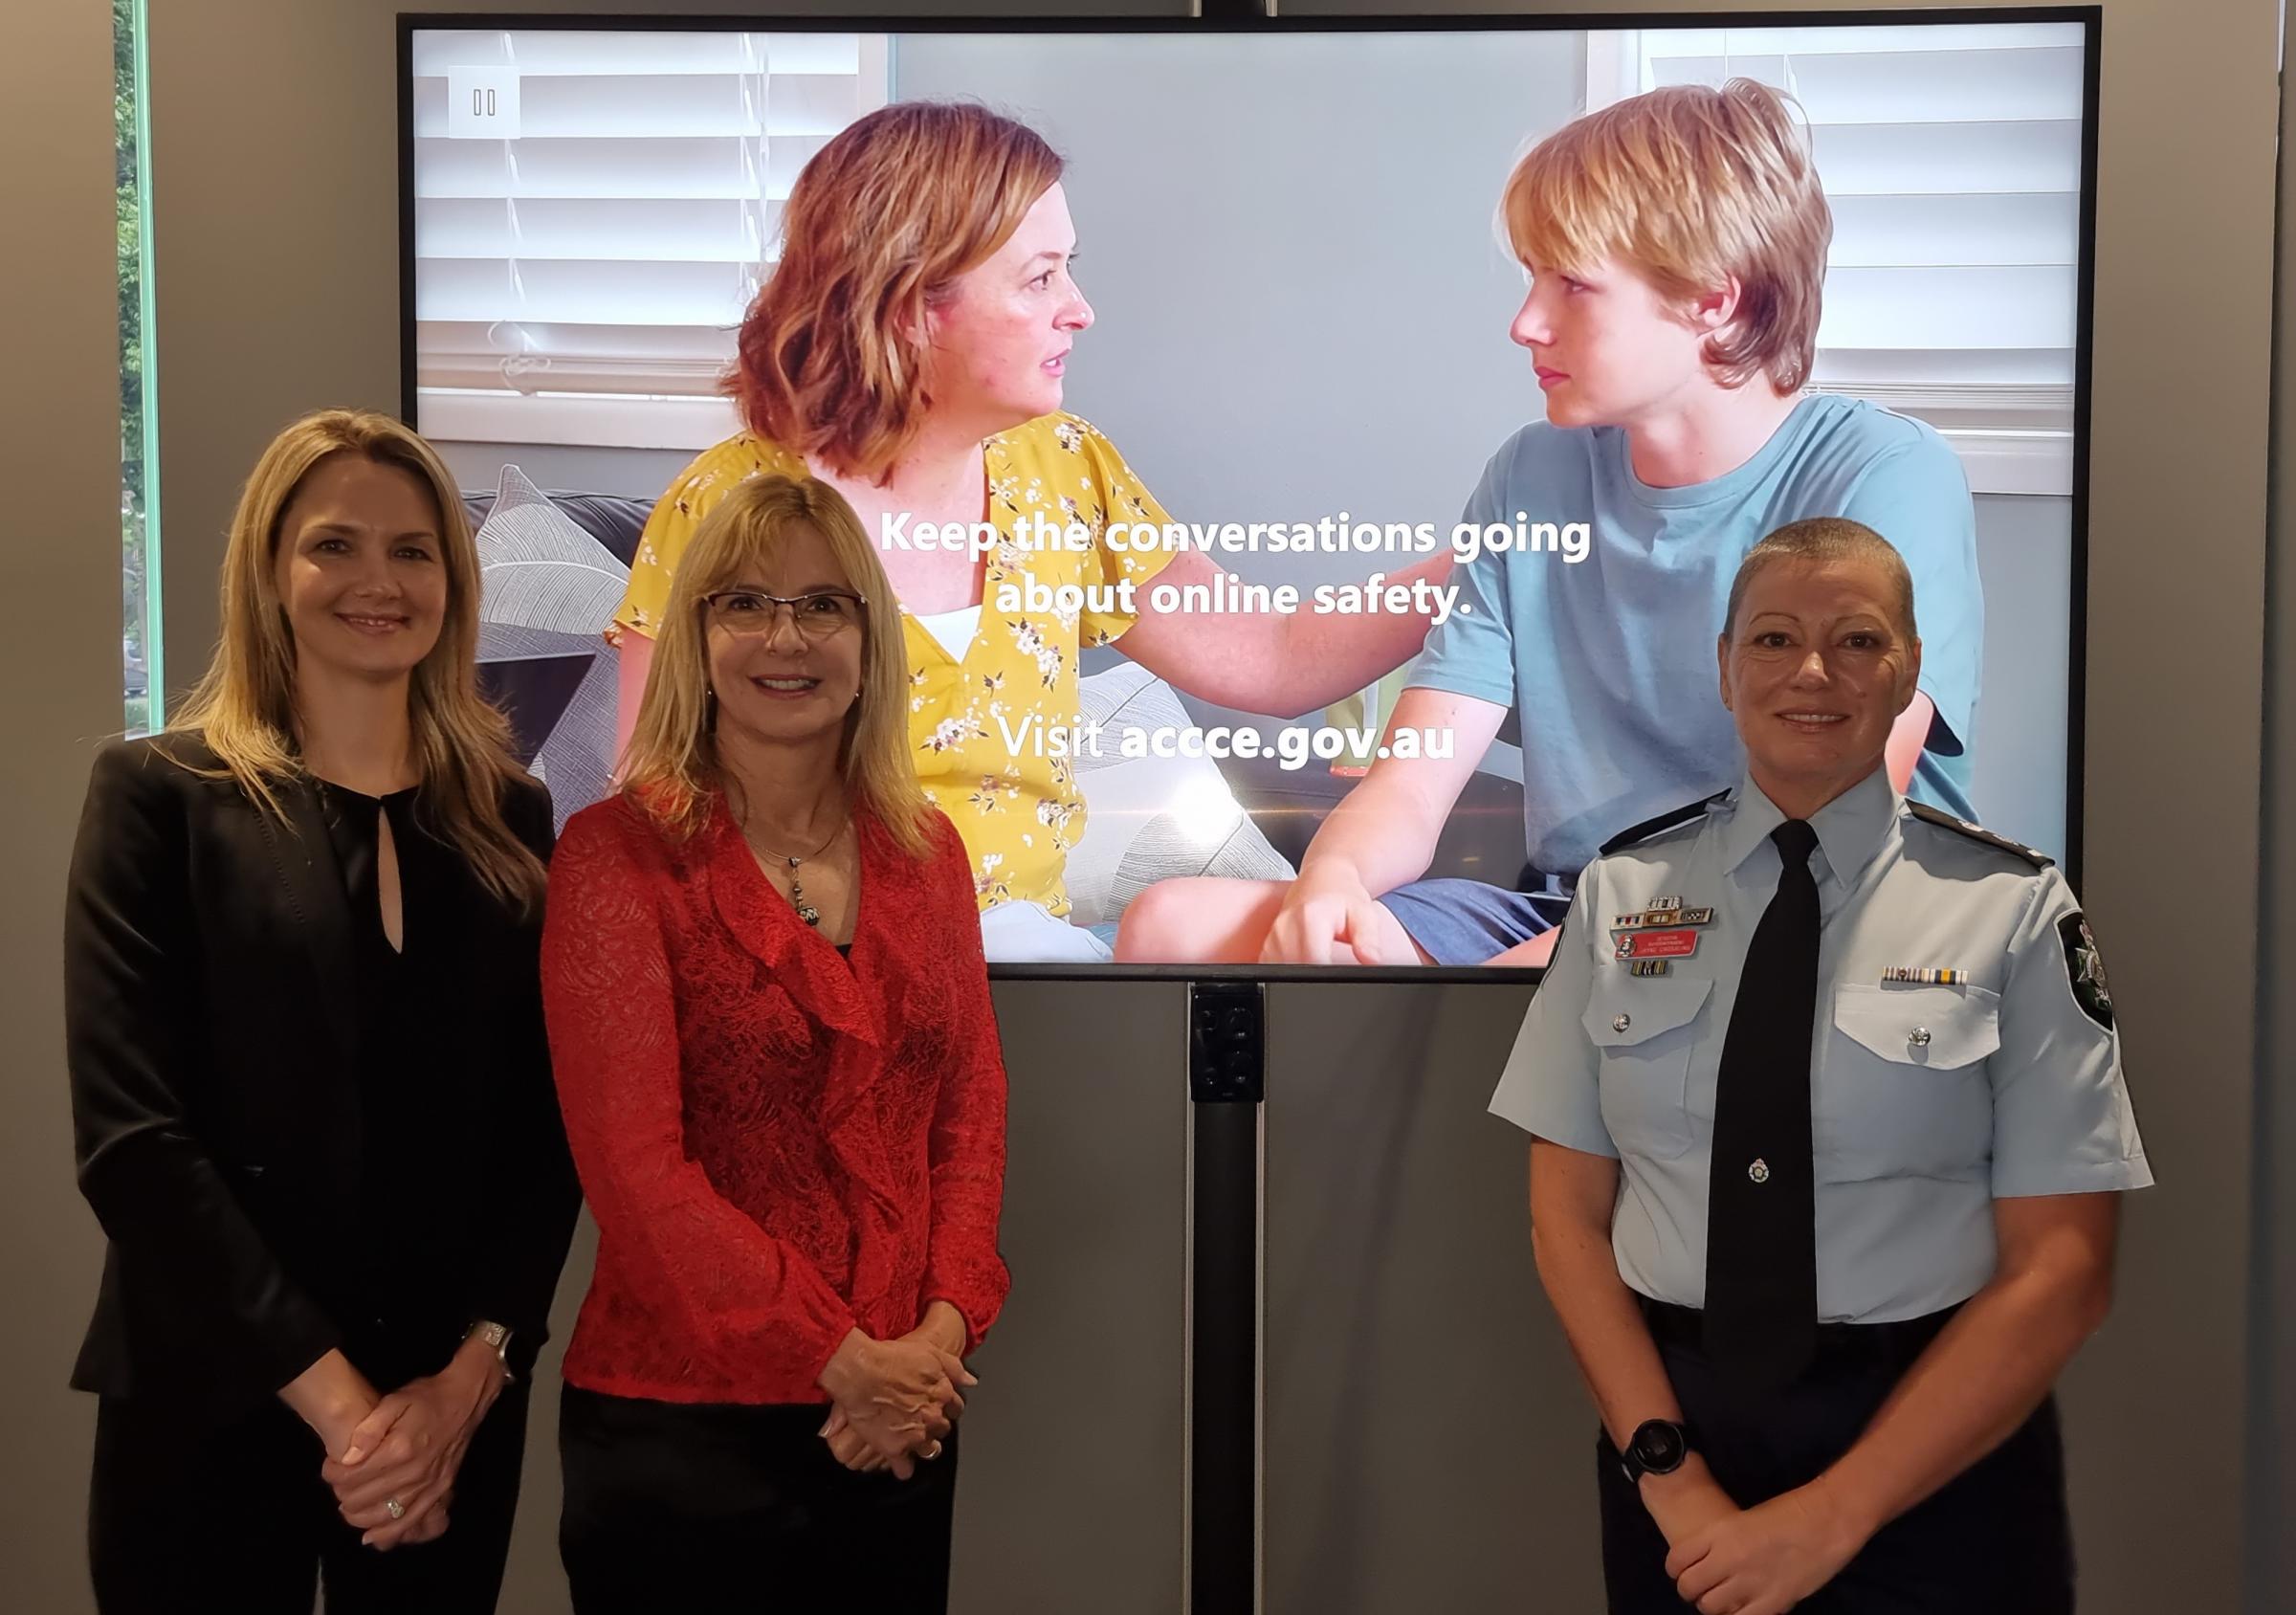 Melissa Roberts Project Manager and Maria Bennett CEO Neighbourhood Watch Australasia with AFP Superintendent Jayne Crossling, at the launch of the Keeping Kids Safe Online campaign